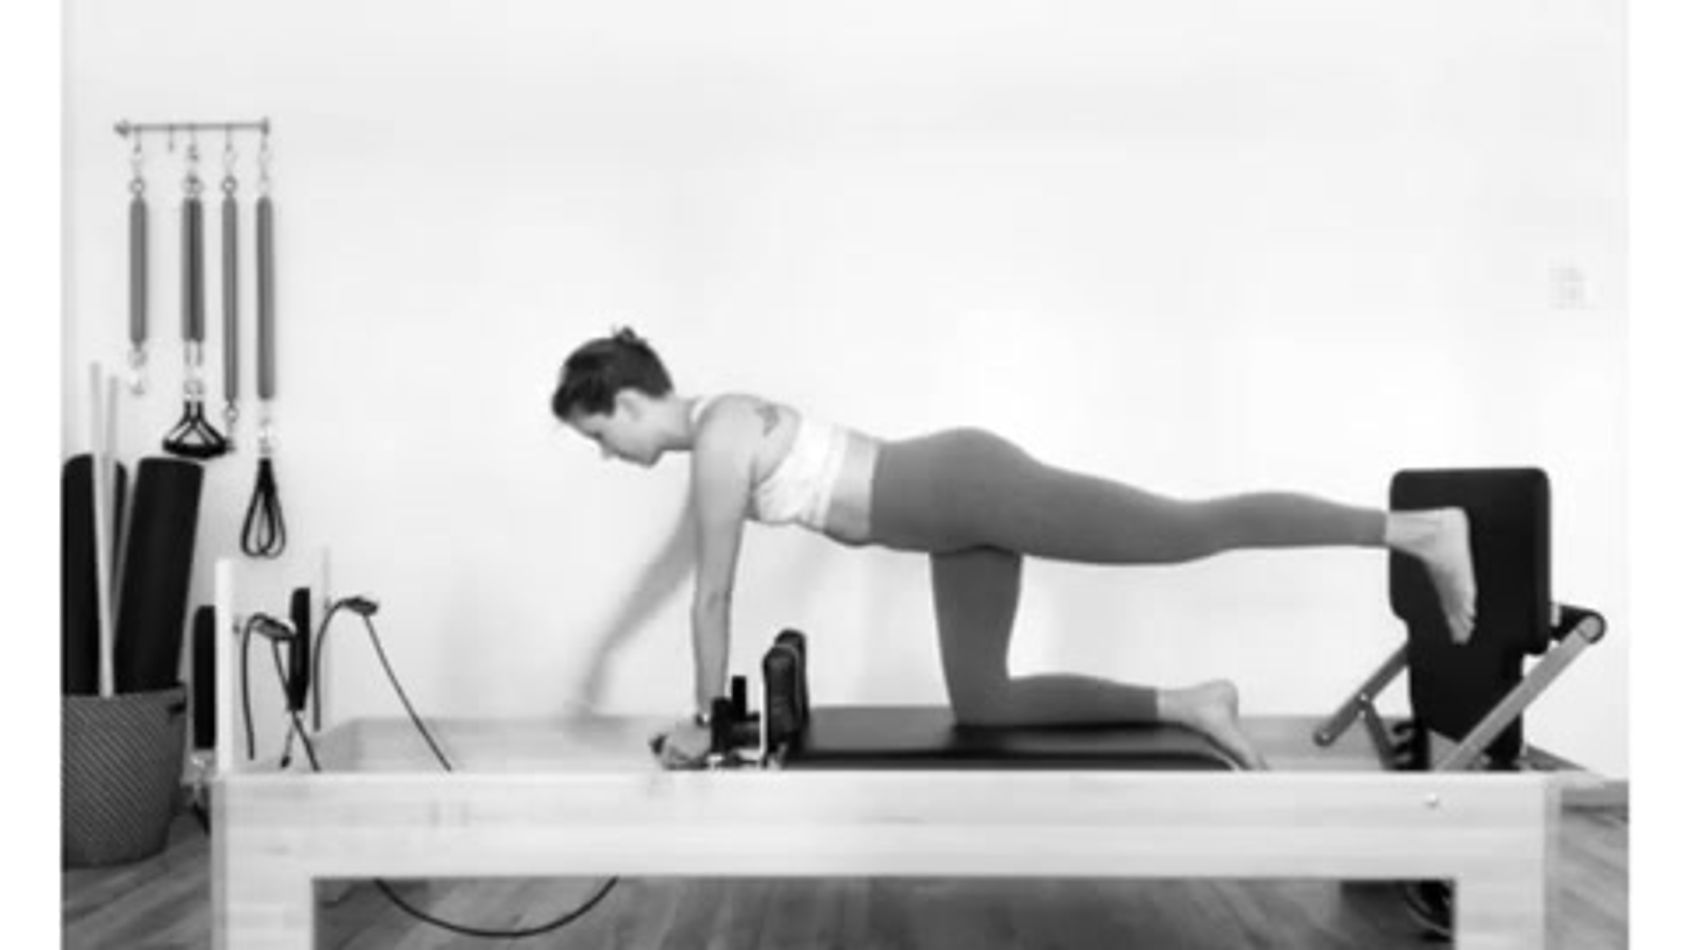 Jumping on Reformer - Quadruped Position